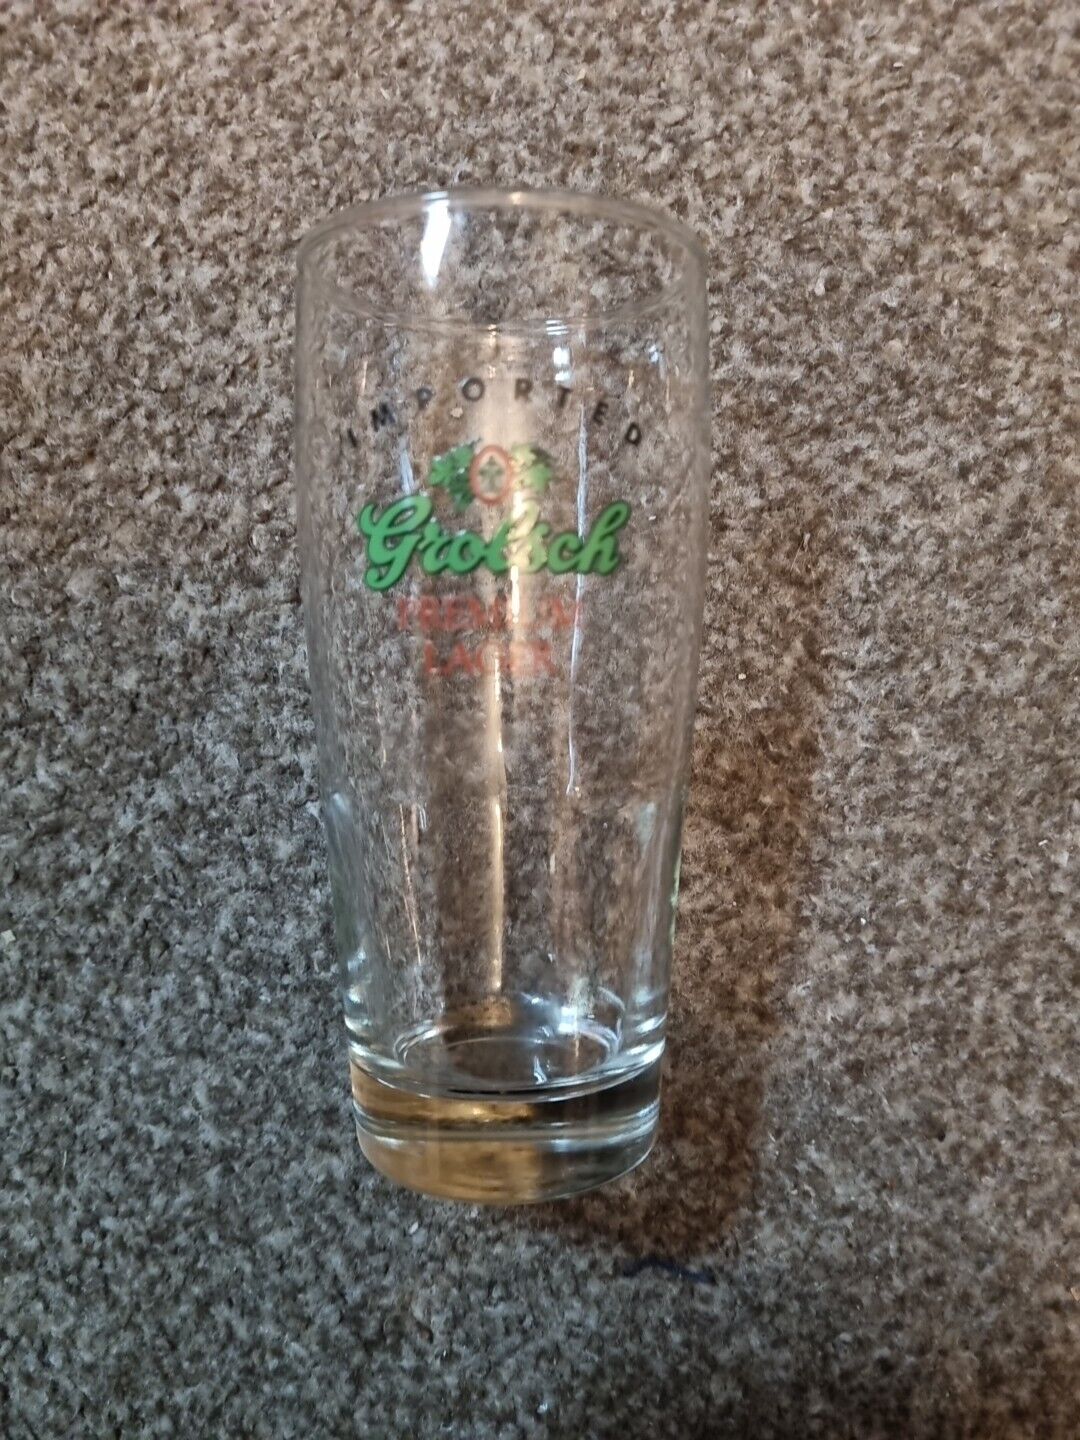 Imported Grolsch Lager Half Pint Glass